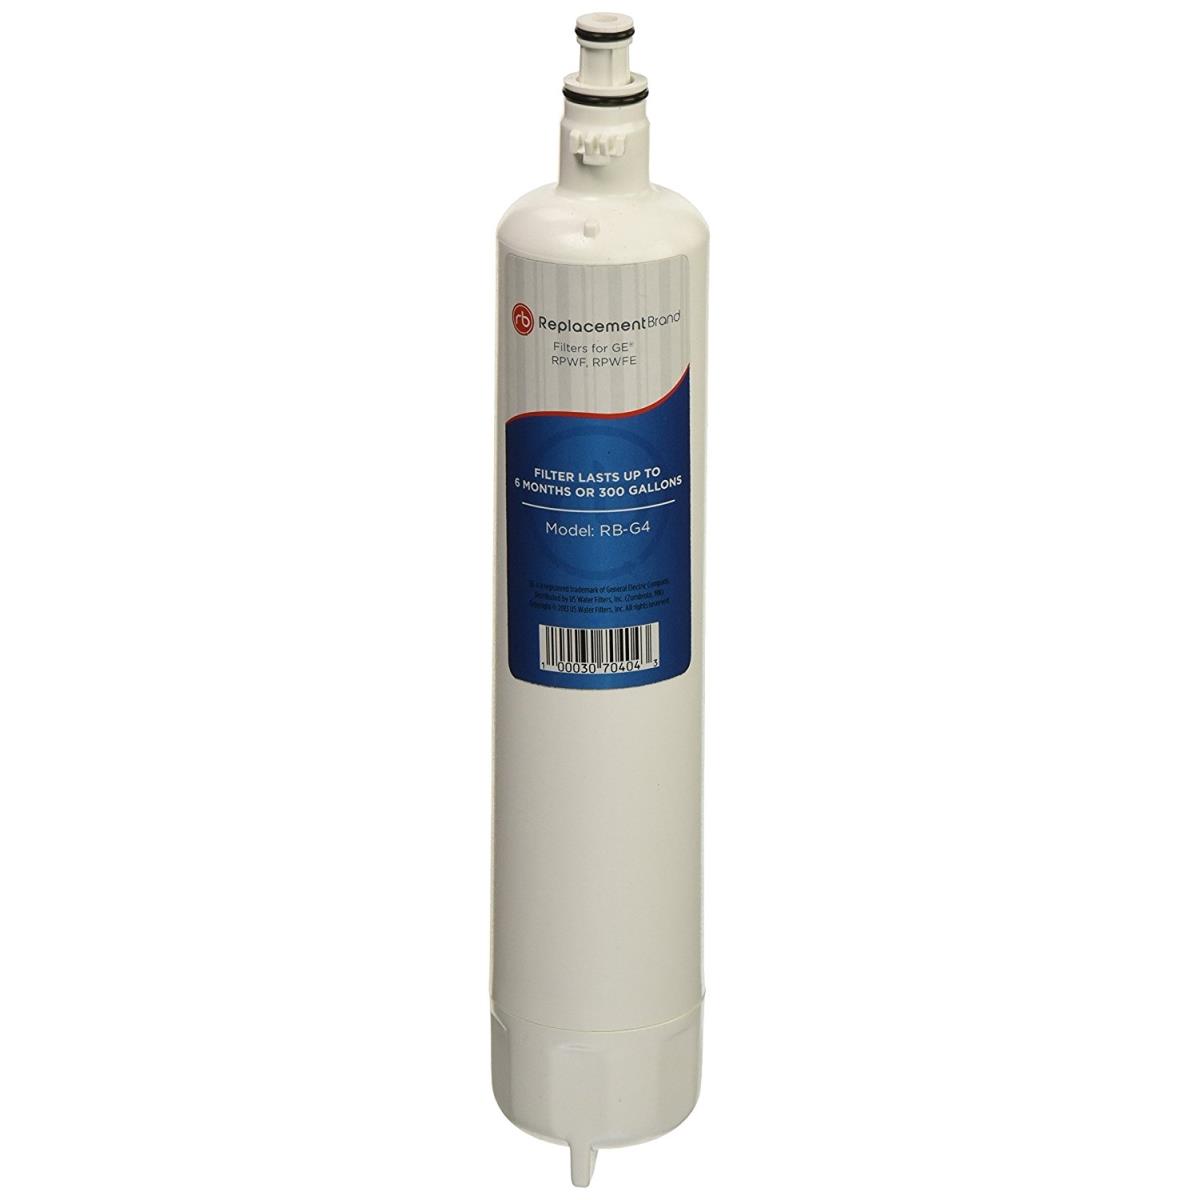 Commercial Water Distributing Replacement Brand Refrigerator Filter for GE RPWF & RPWFE